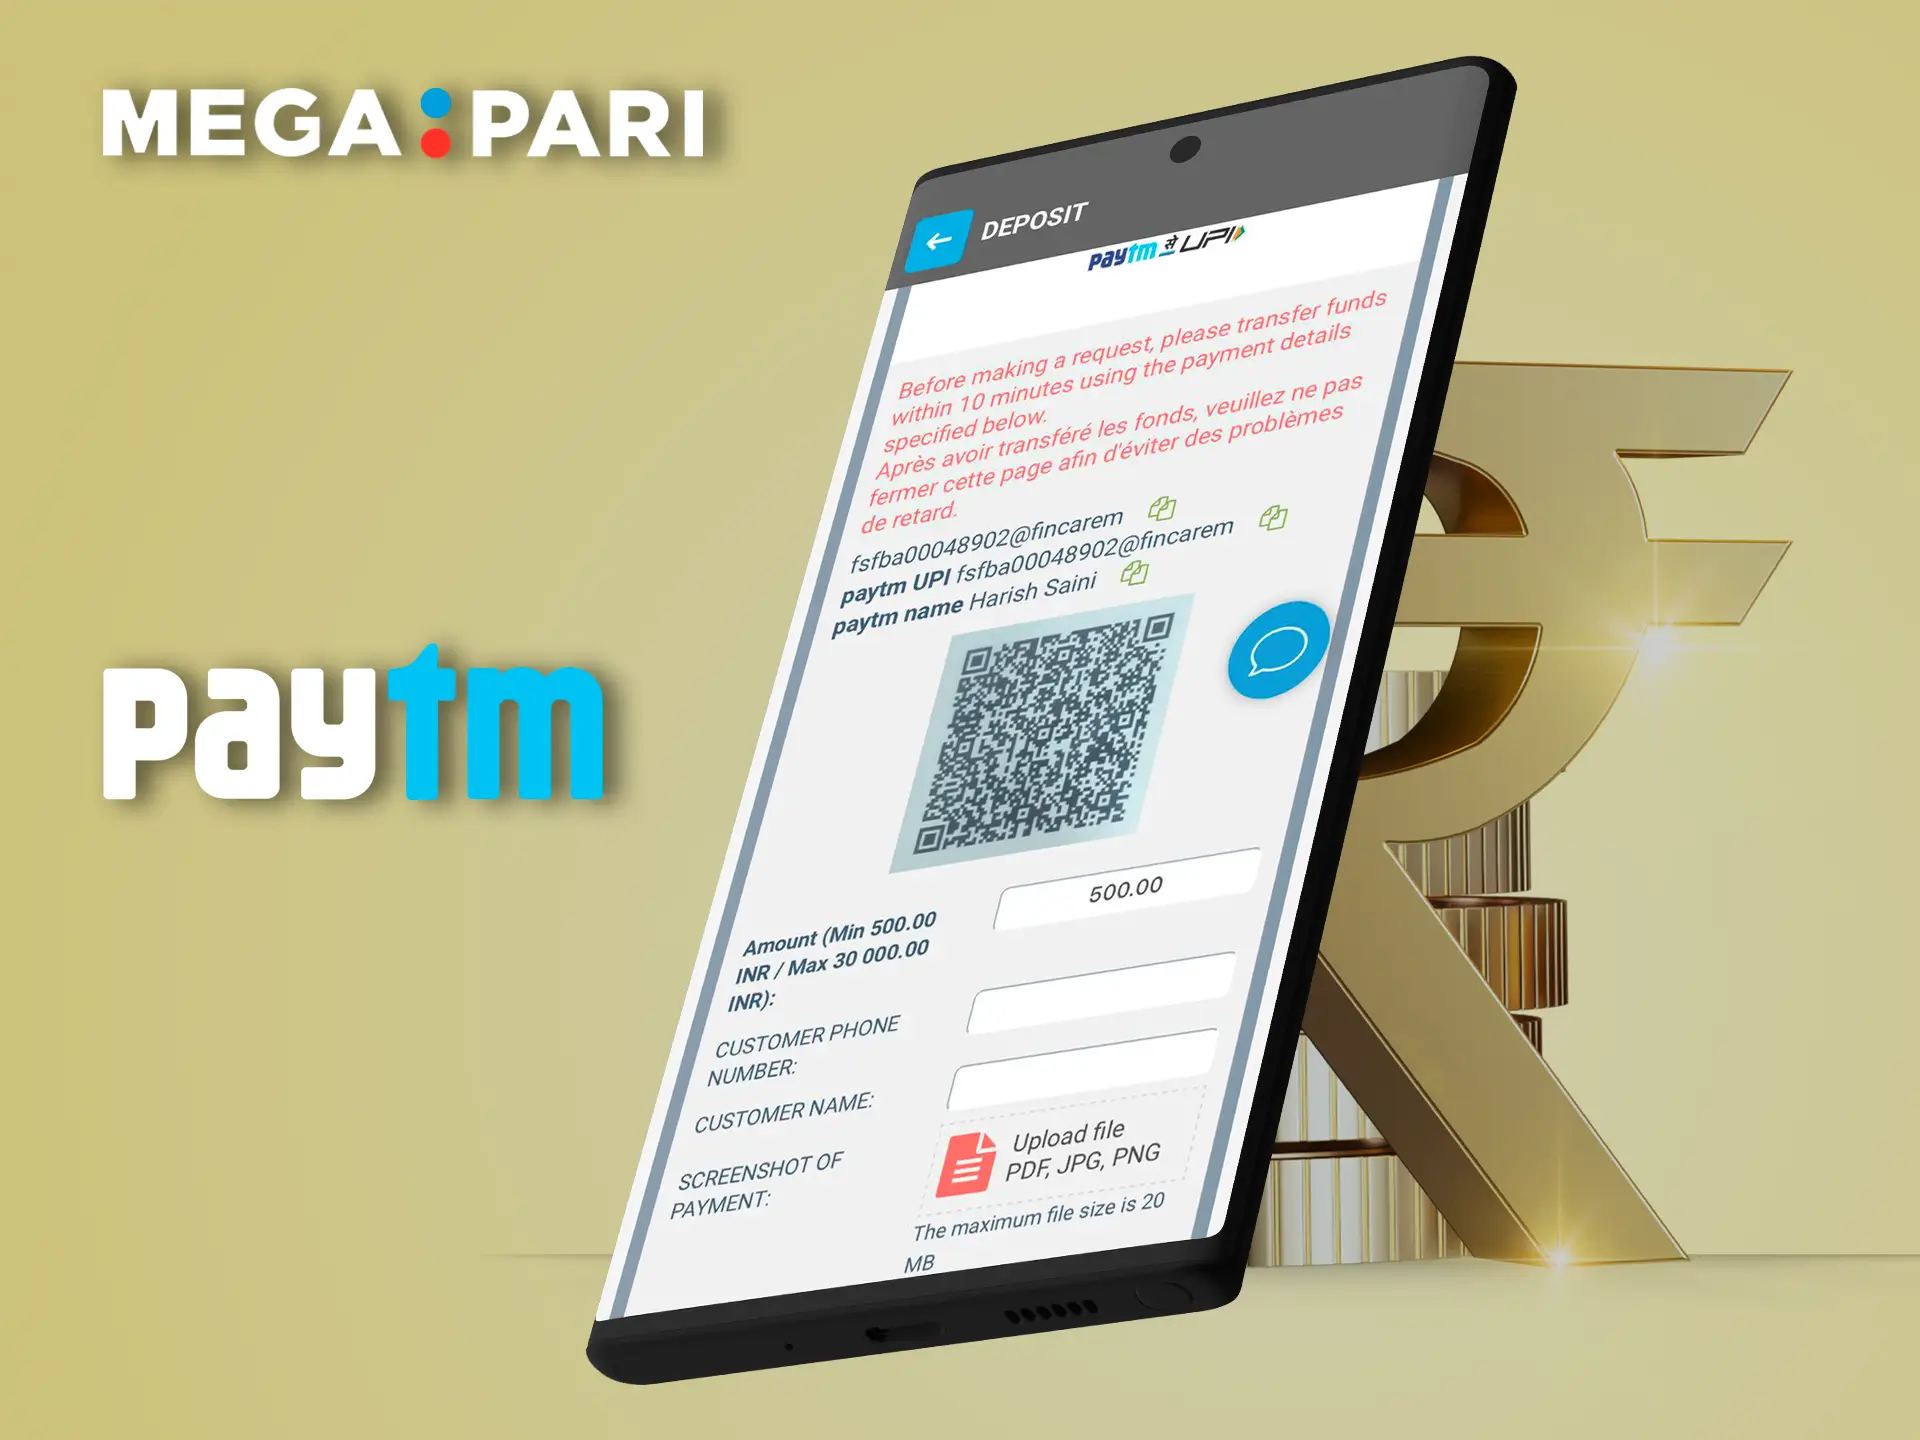 At Megapari Casino, you will be able to withdraw your funds instantly to your personal PayTm account.